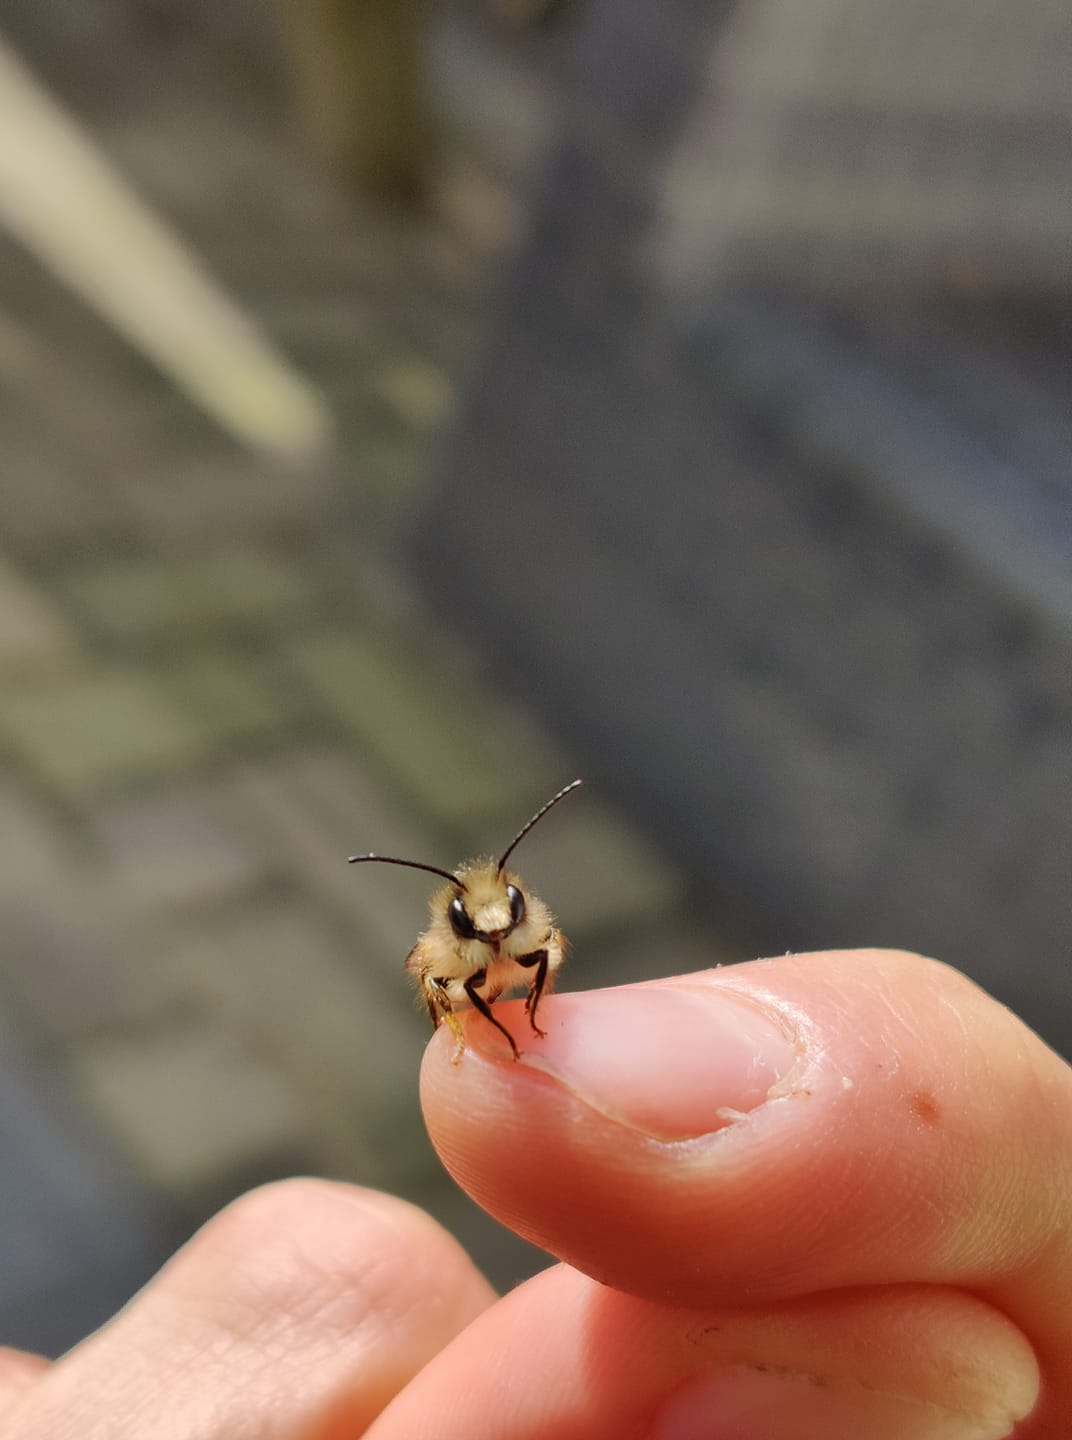 super tiny bee resting on someone's finger